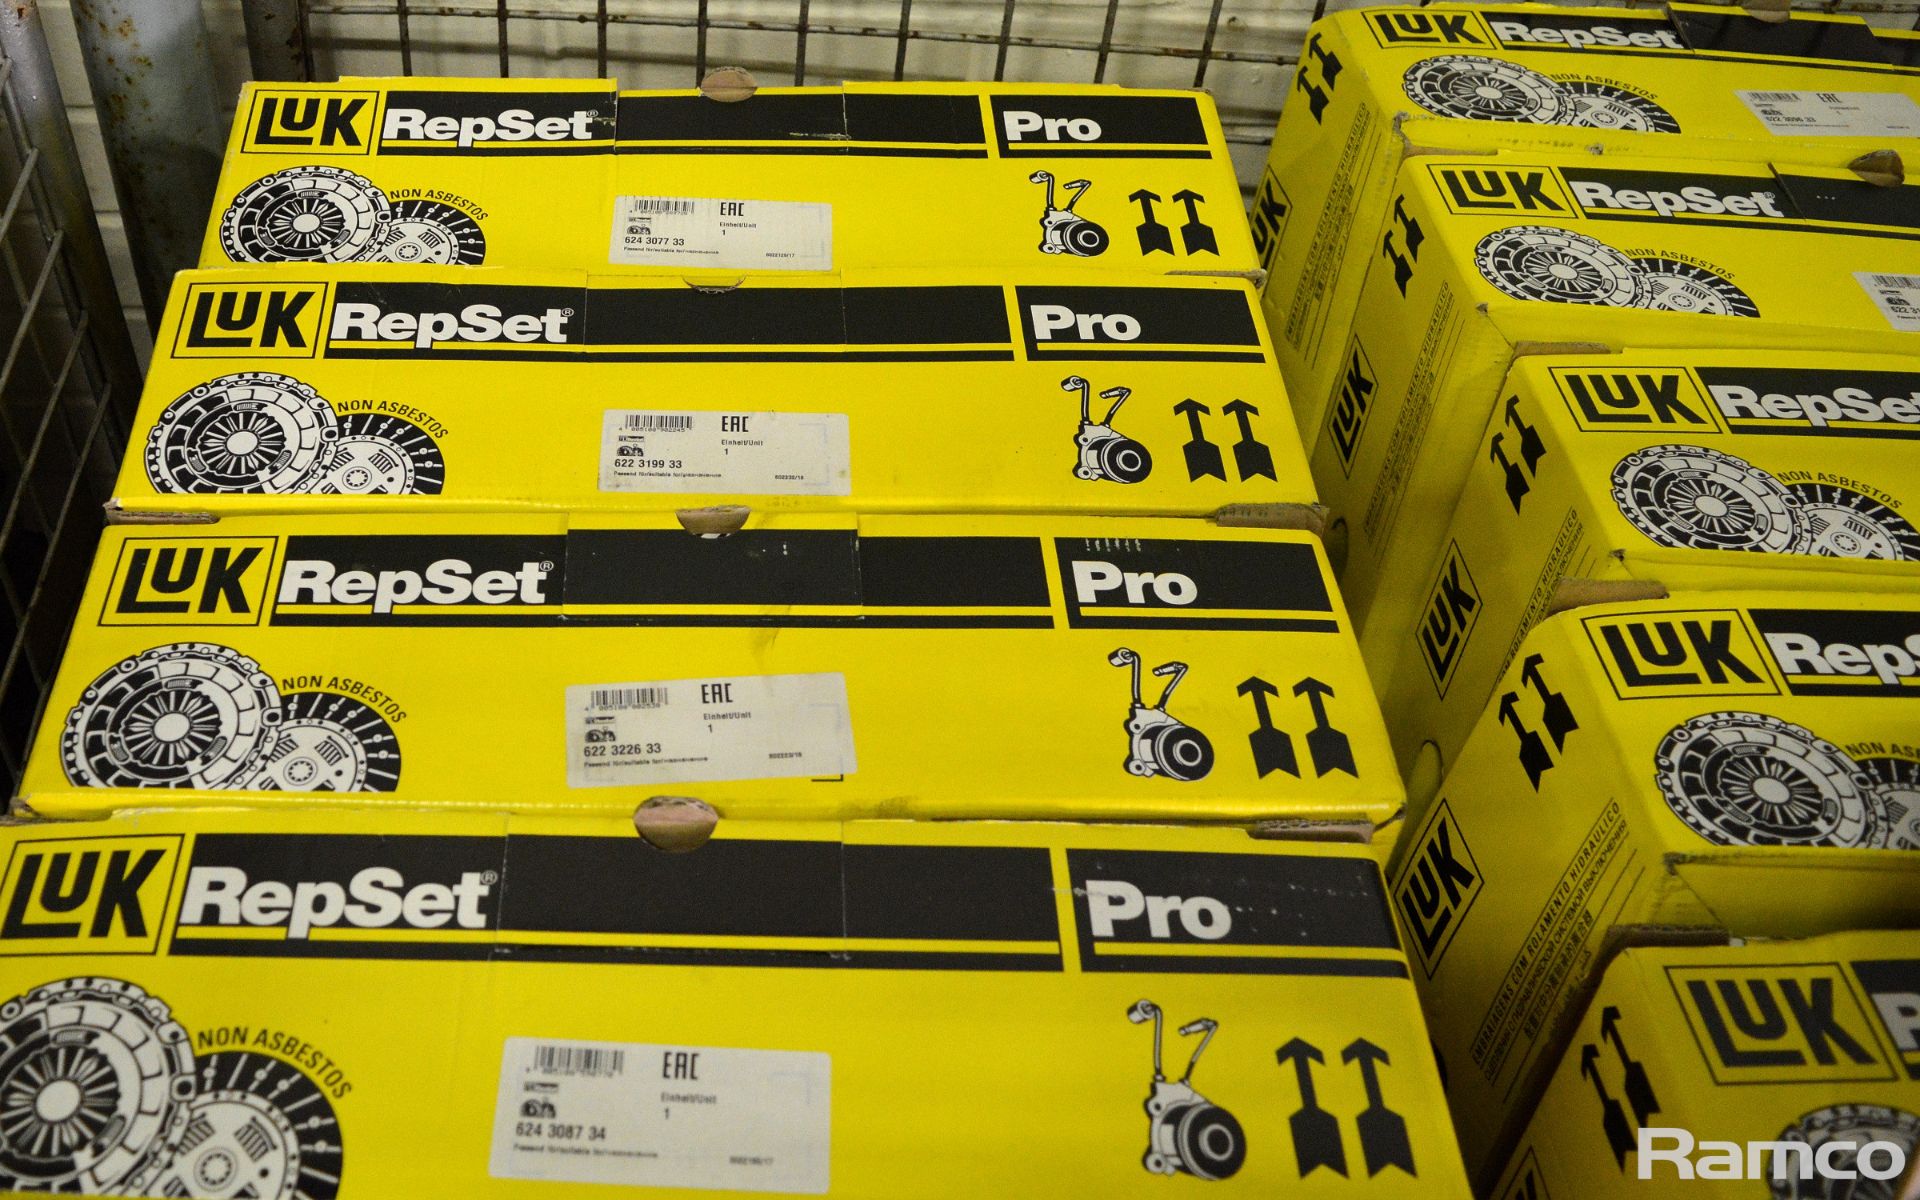 LUK Repset Pro clutch kits - see pictures for model / type - Image 2 of 5